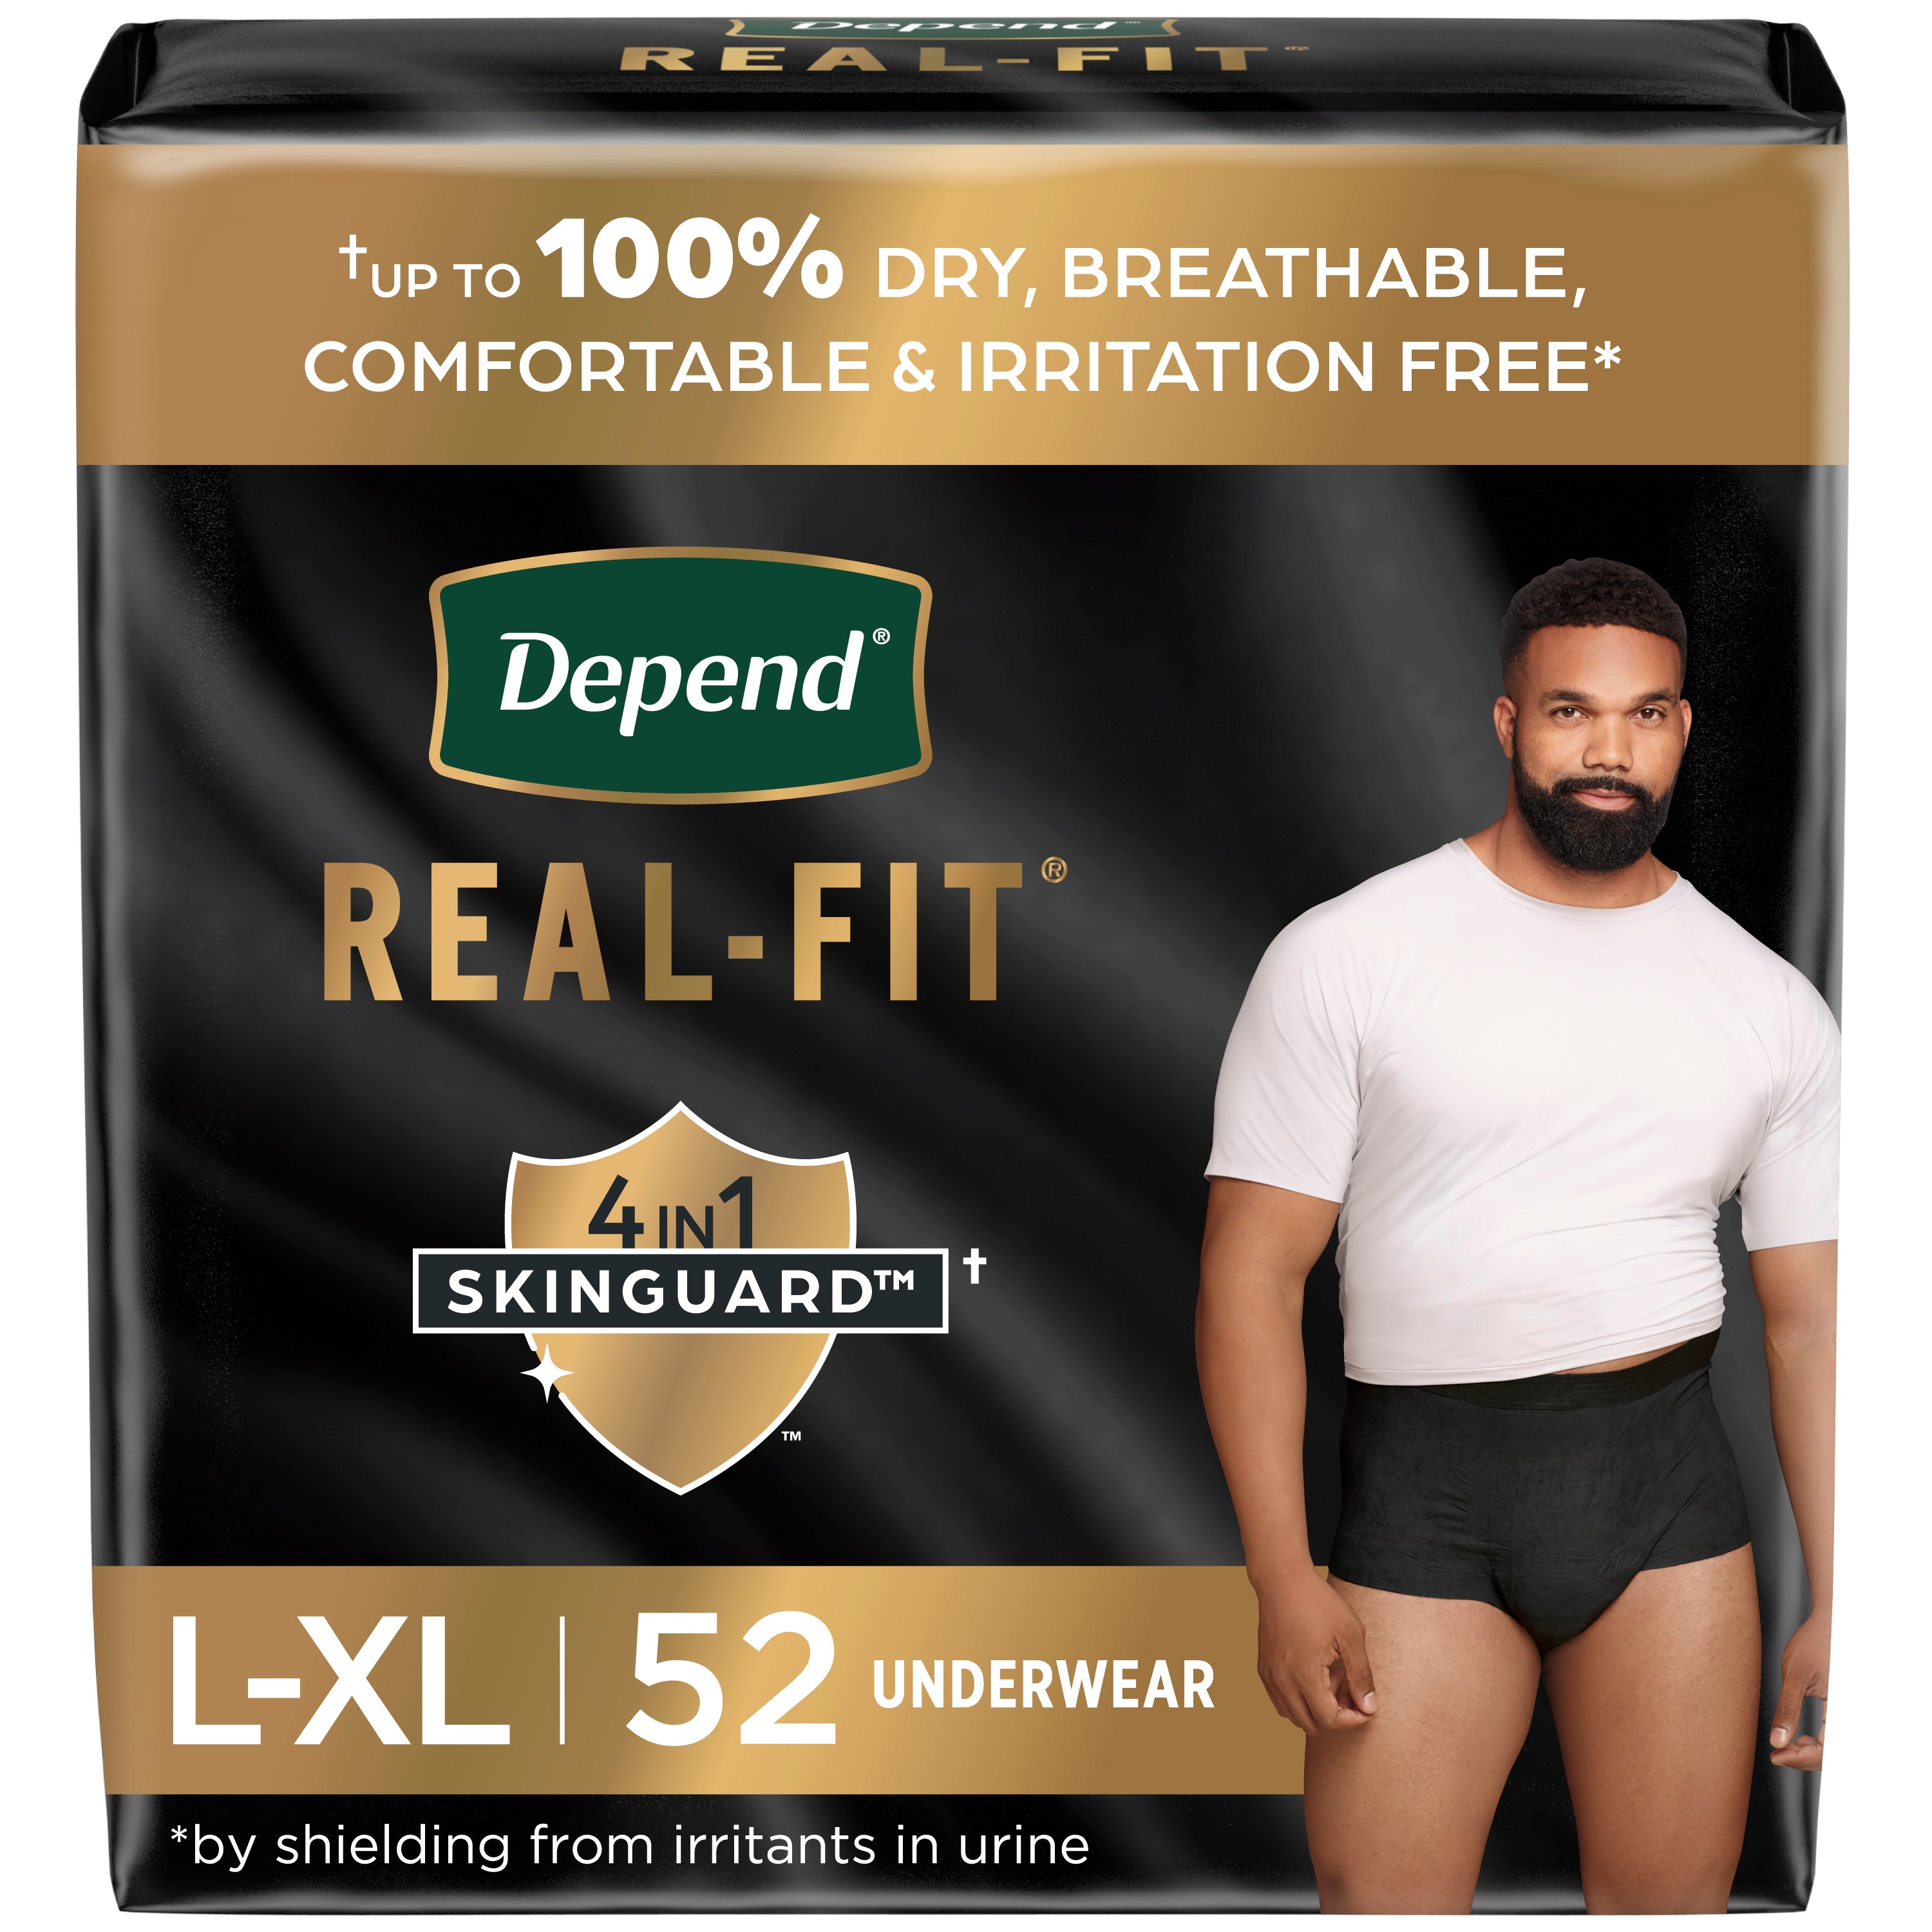 Depend Real-Fit Underwear for Men - Value Pack